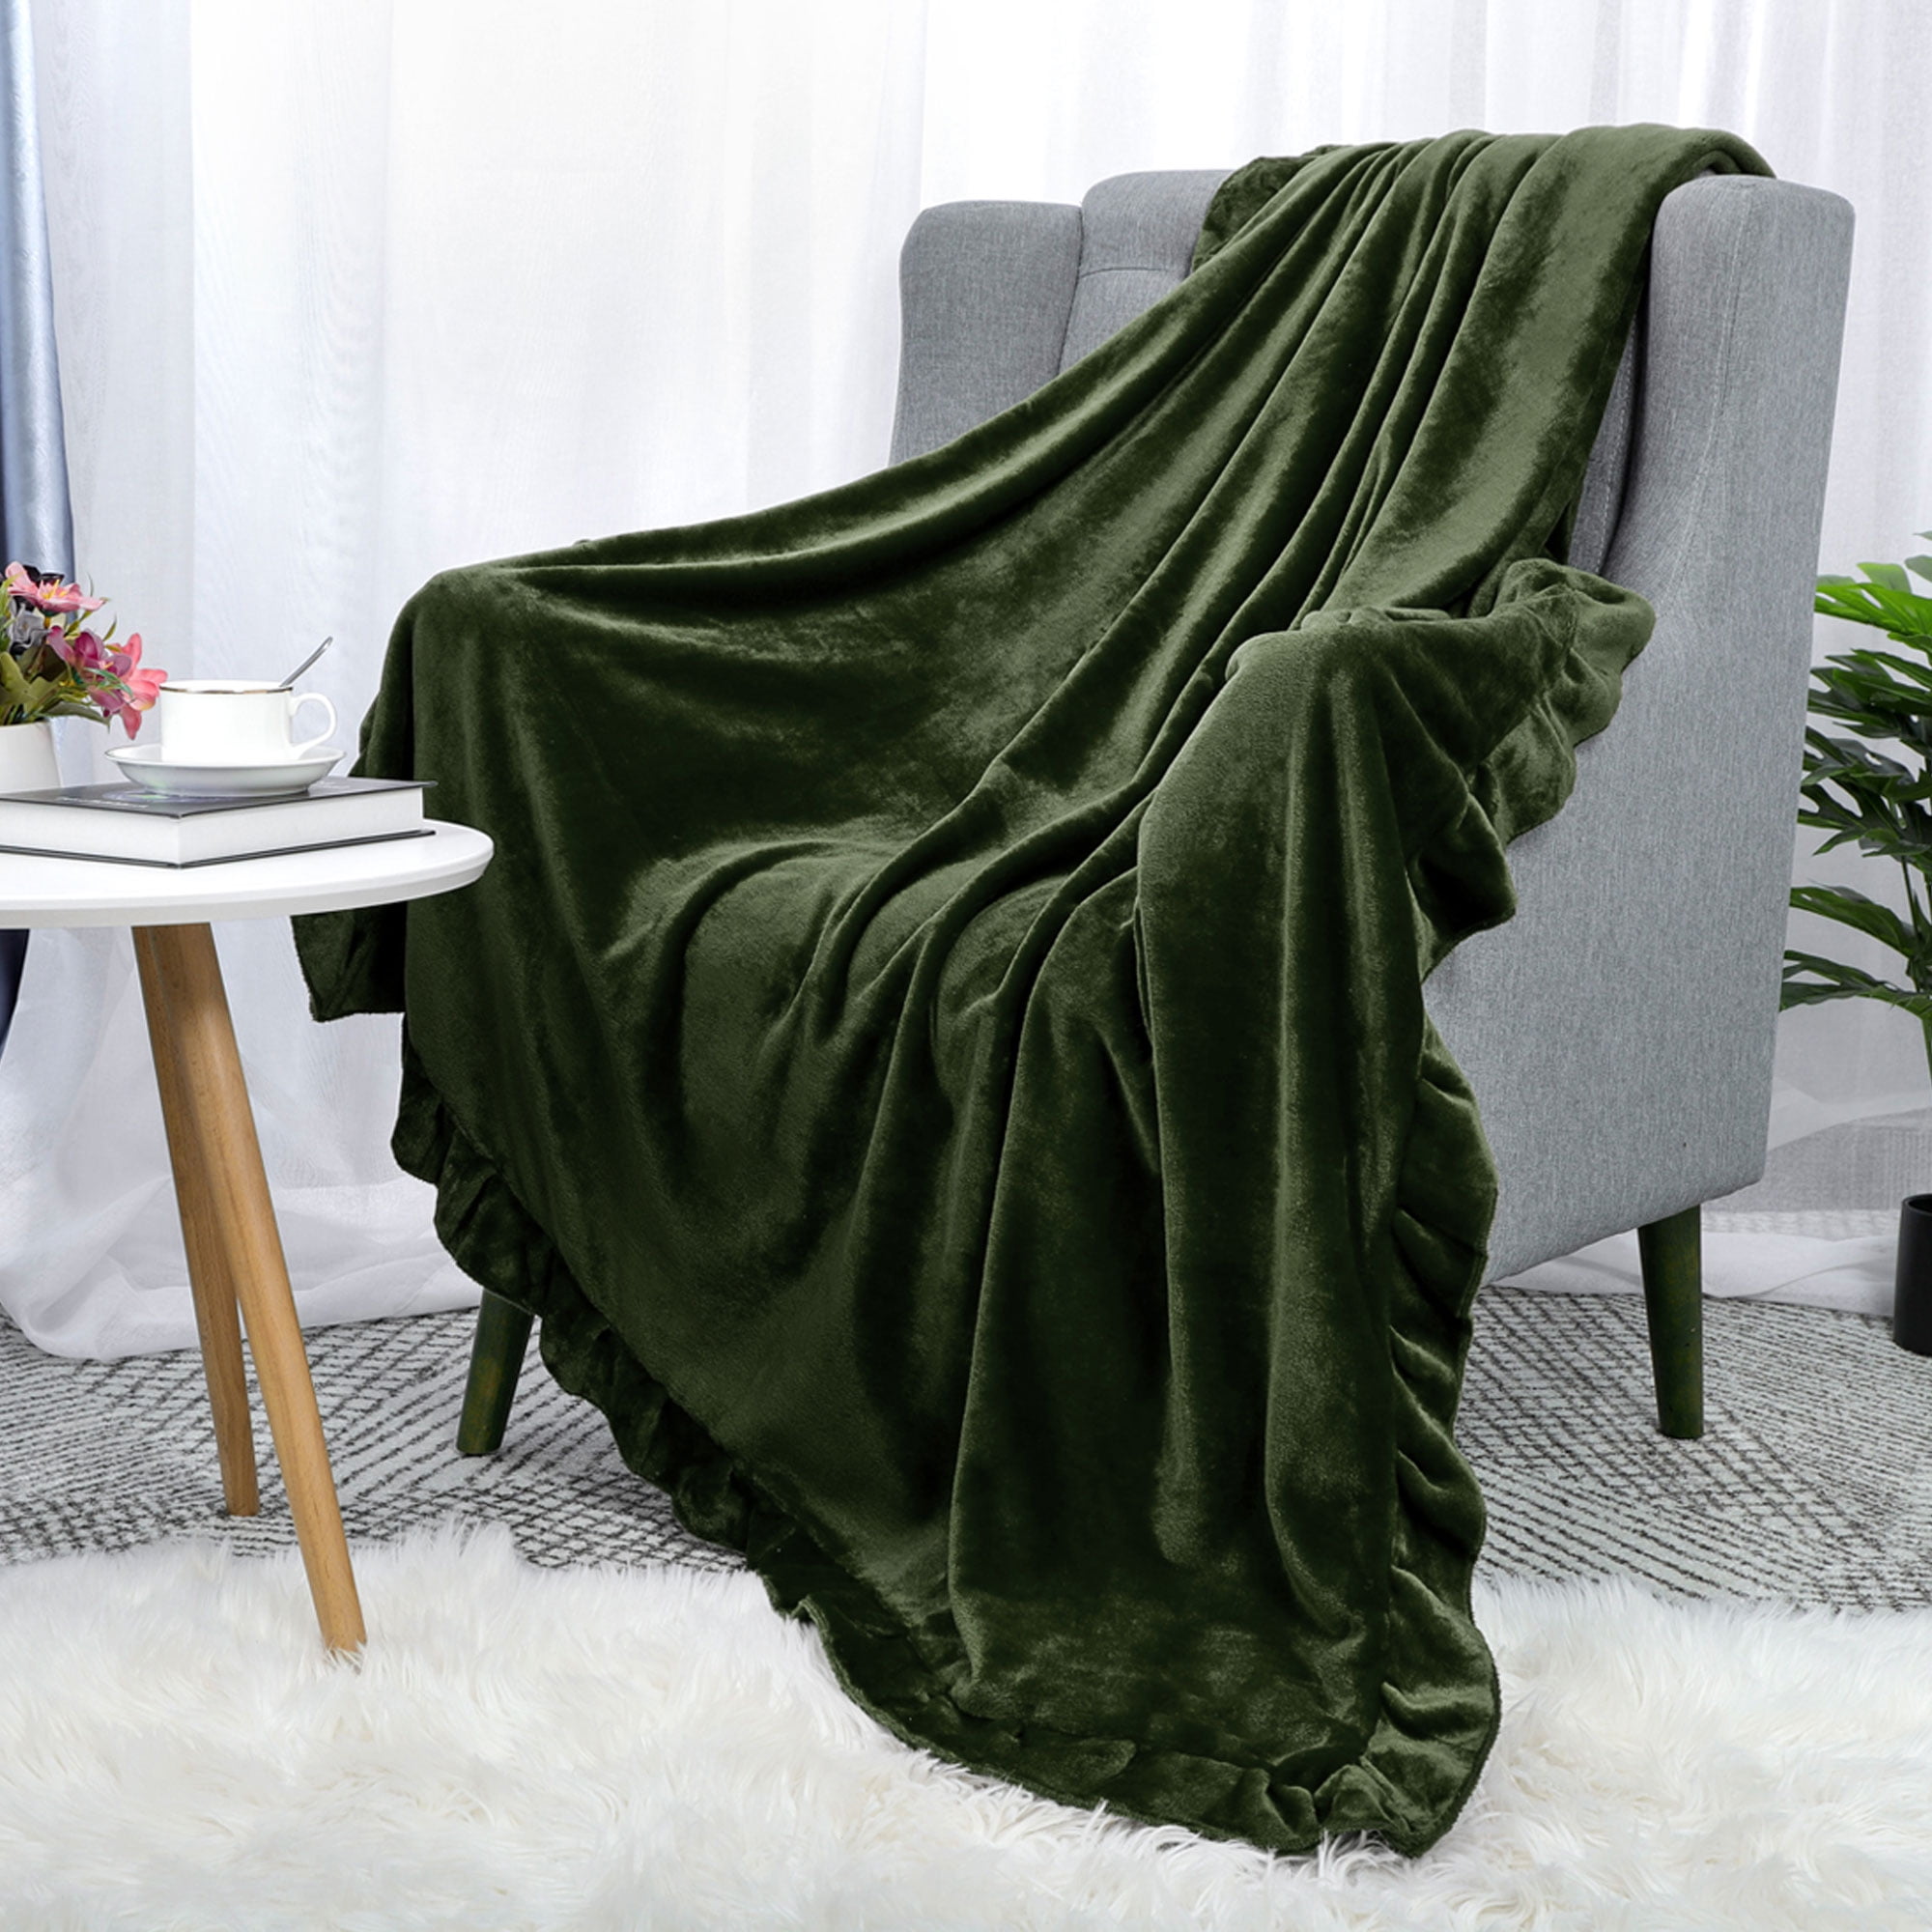 Decorative Velvet Plush Throw Blanket With Ruffle Trim for Sofa Couch